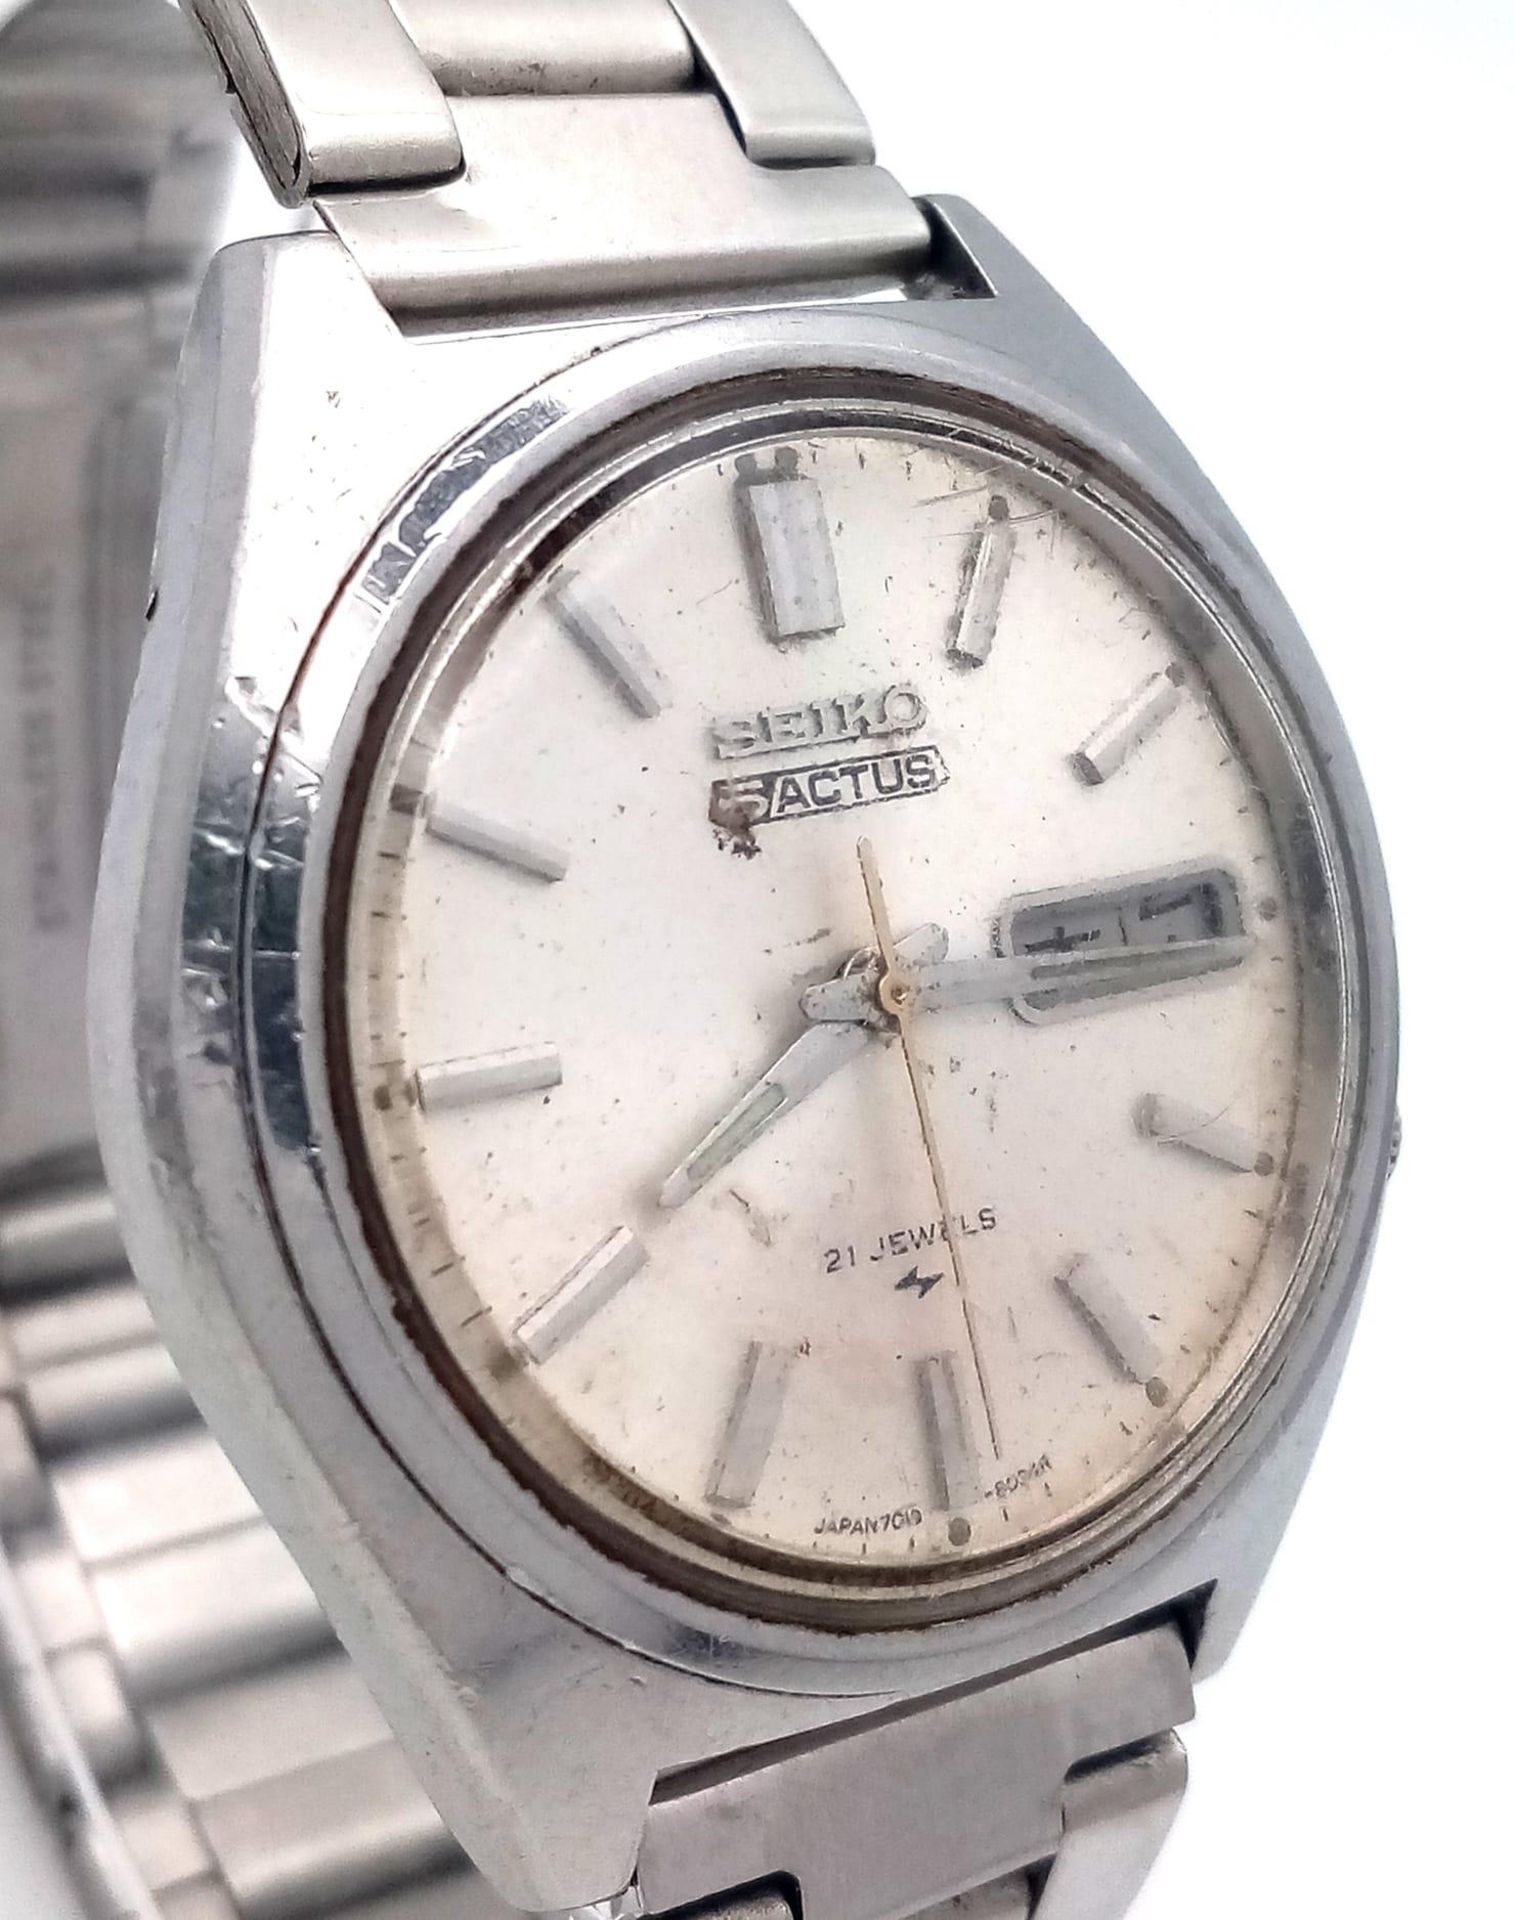 A Vintage Seiko 5 Actus Gents Watch. Stainless steel bracelet and case - 38mm. Aged dial with day/ - Bild 3 aus 6